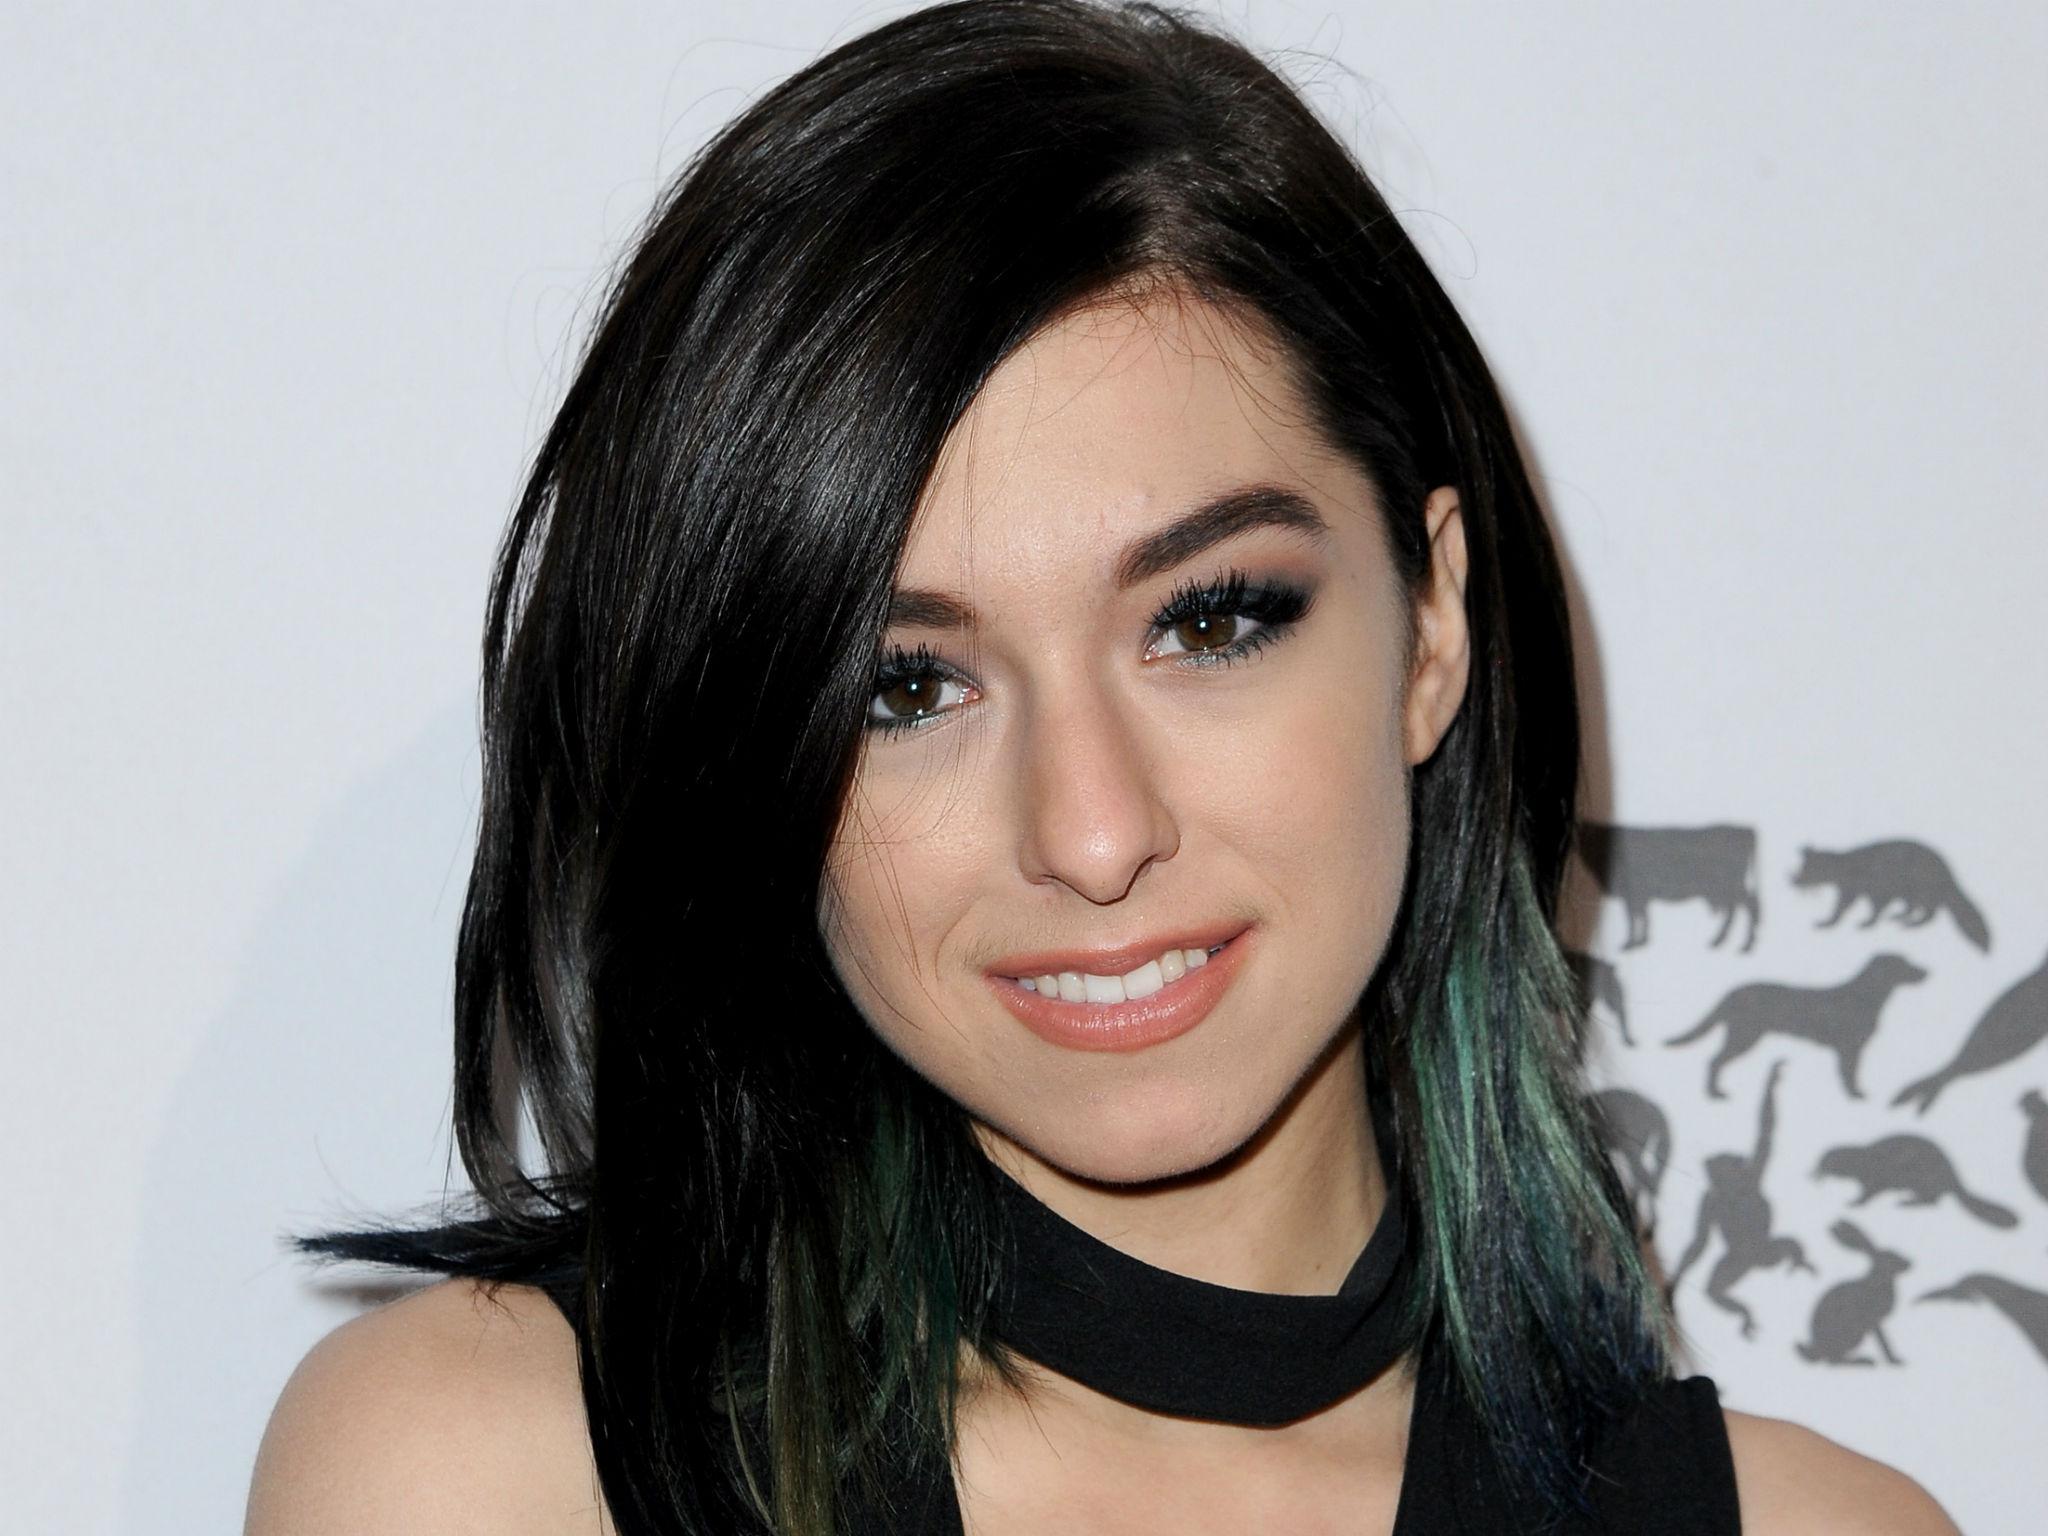 Christina Grimmie in May, 2016